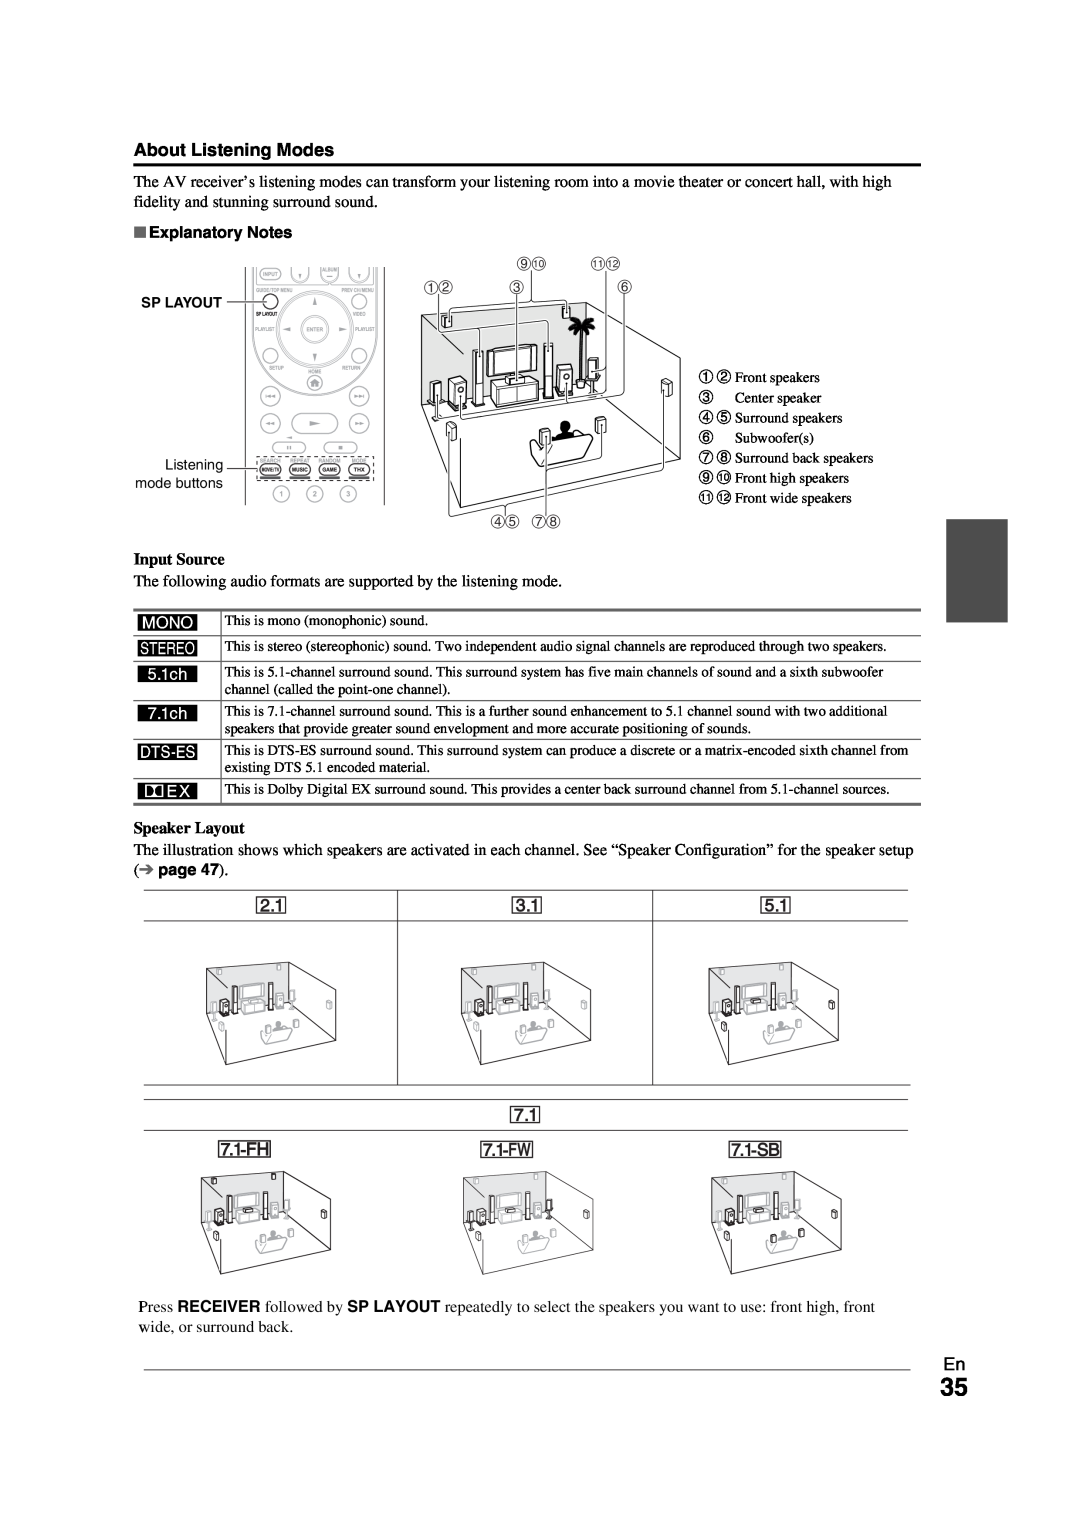 Onkyo TX-NR709 instruction manual About Listening Modes, N B b, Explanatory Notes 